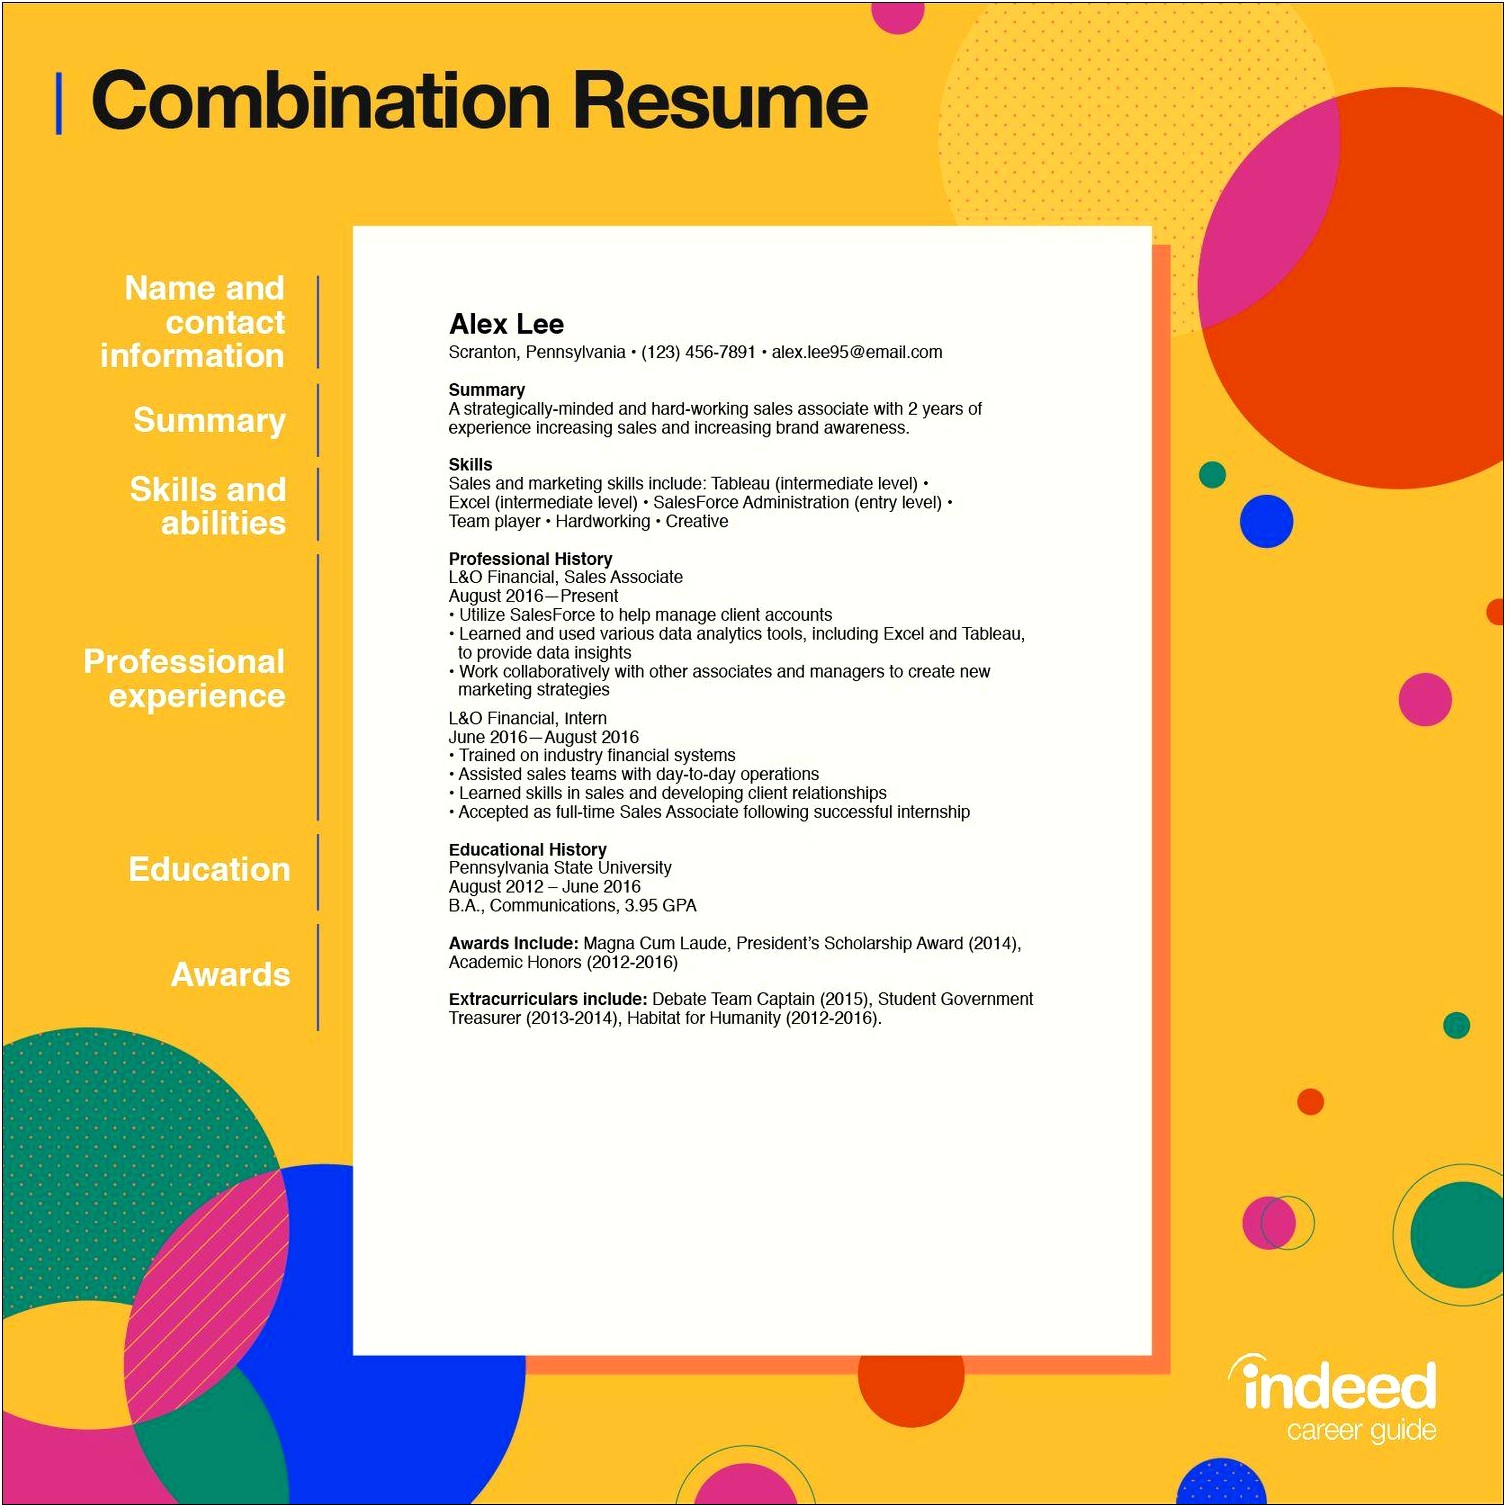 Resume Good And Bad Examples